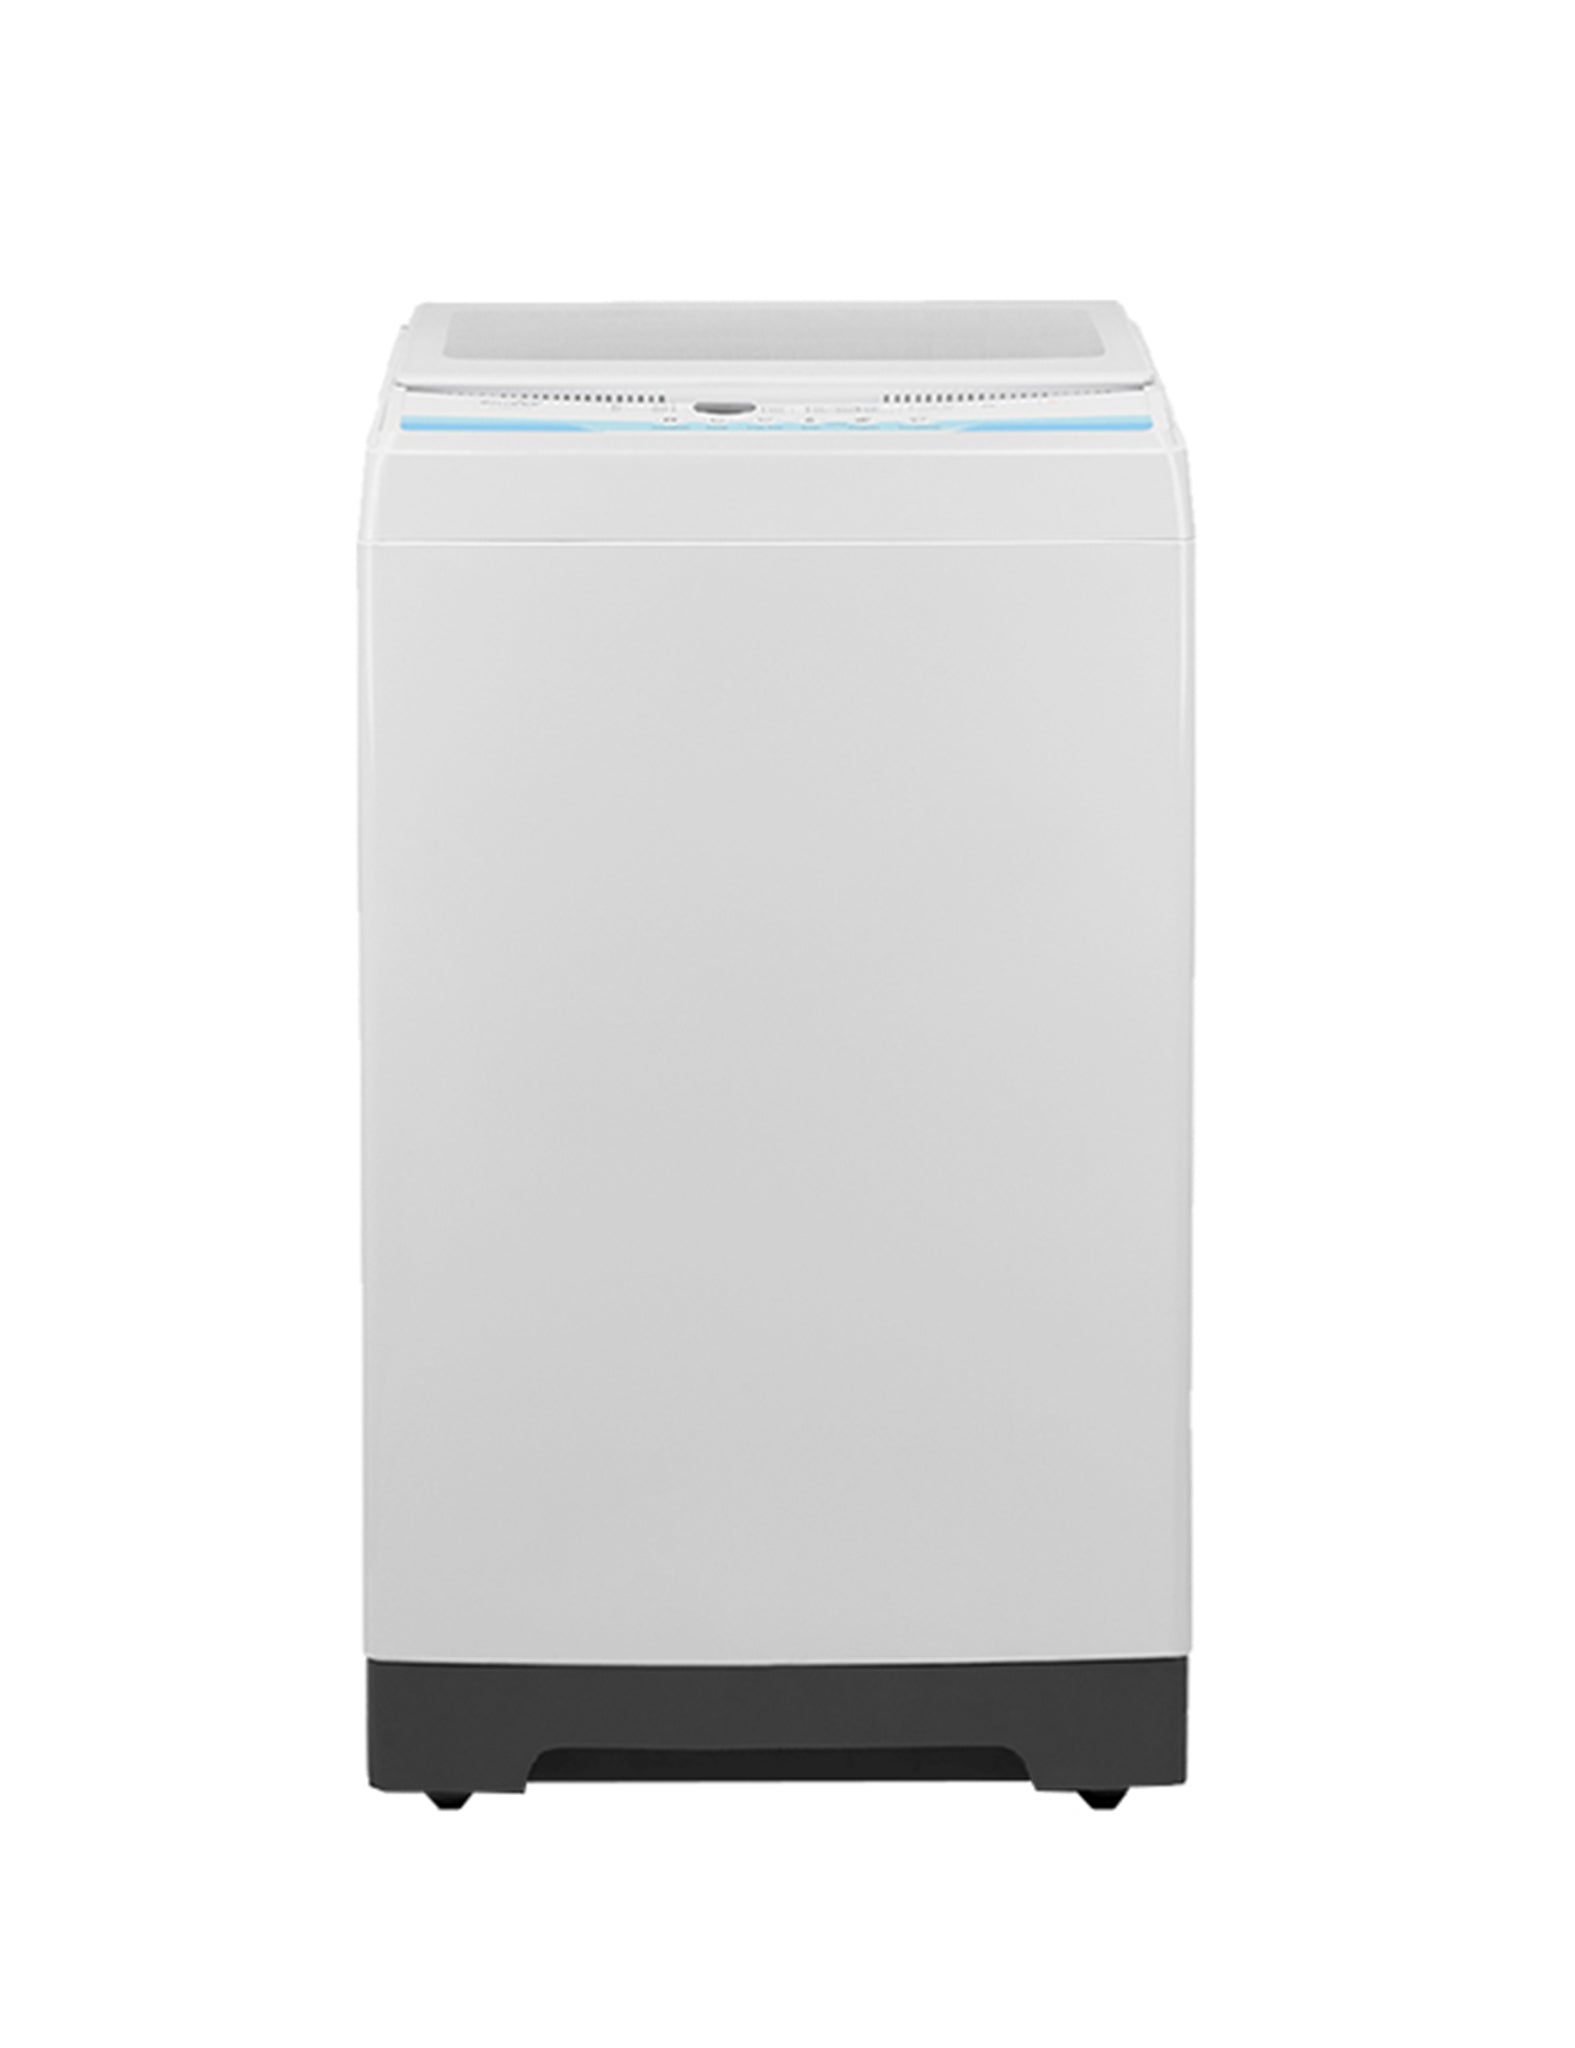  COMFEE' Portable Washing Machine, 0.9 Cu.ft Compact Washer With  LED Display, 5 Wash Cycles, 2 Built-in Rollers, Space Saving Full-Automatic  Washer, Ideal for RV/Dorm/Apartment, Ivory White : Appliances